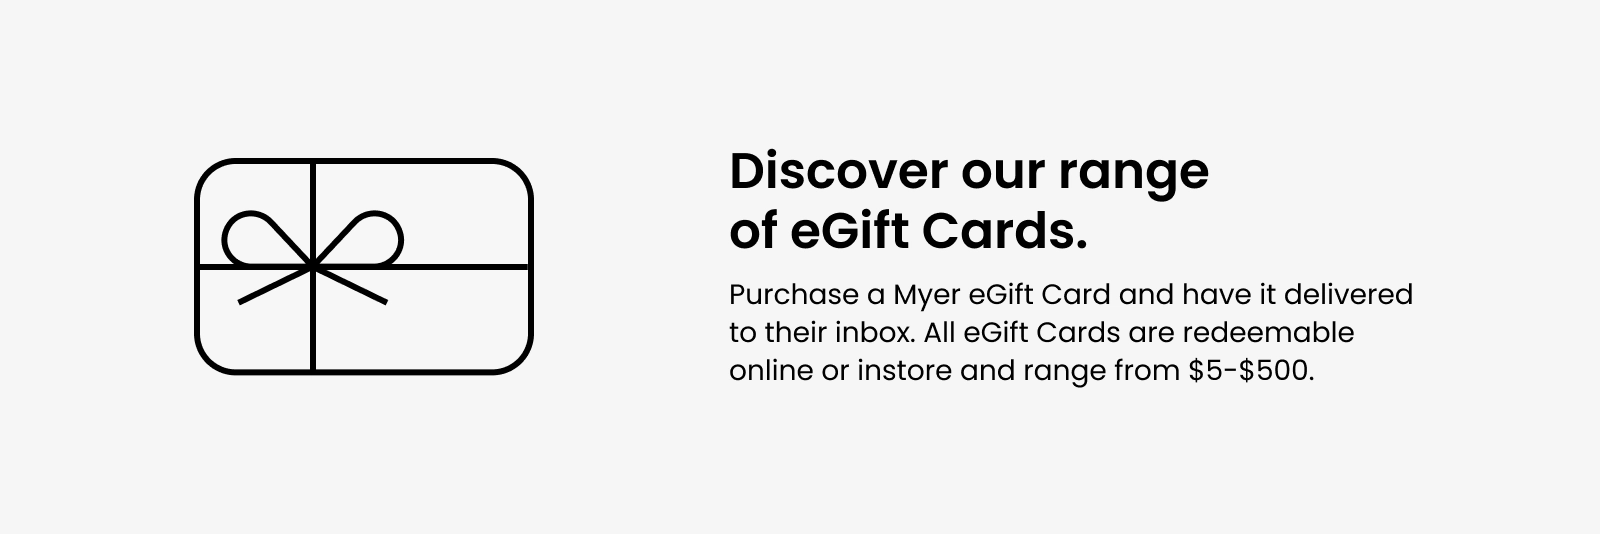 Gift Cards Retail Corporate